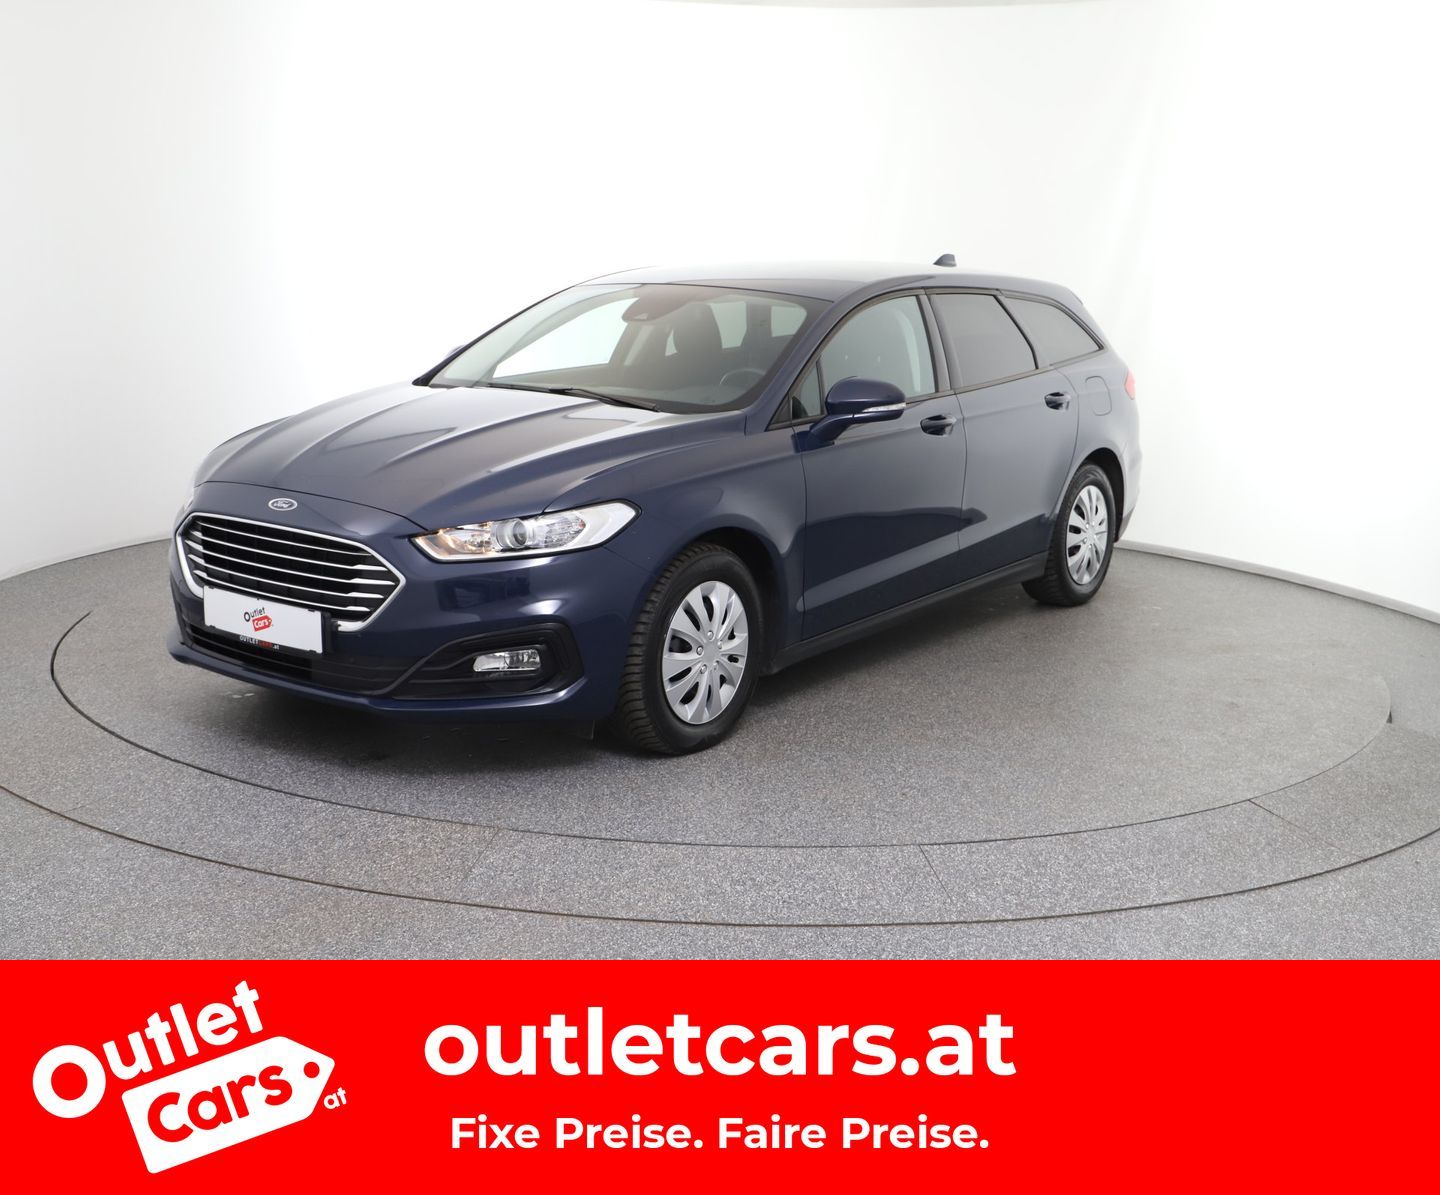 Ford Mondeo Traveller Trend 2,0 EcoBlue SCR